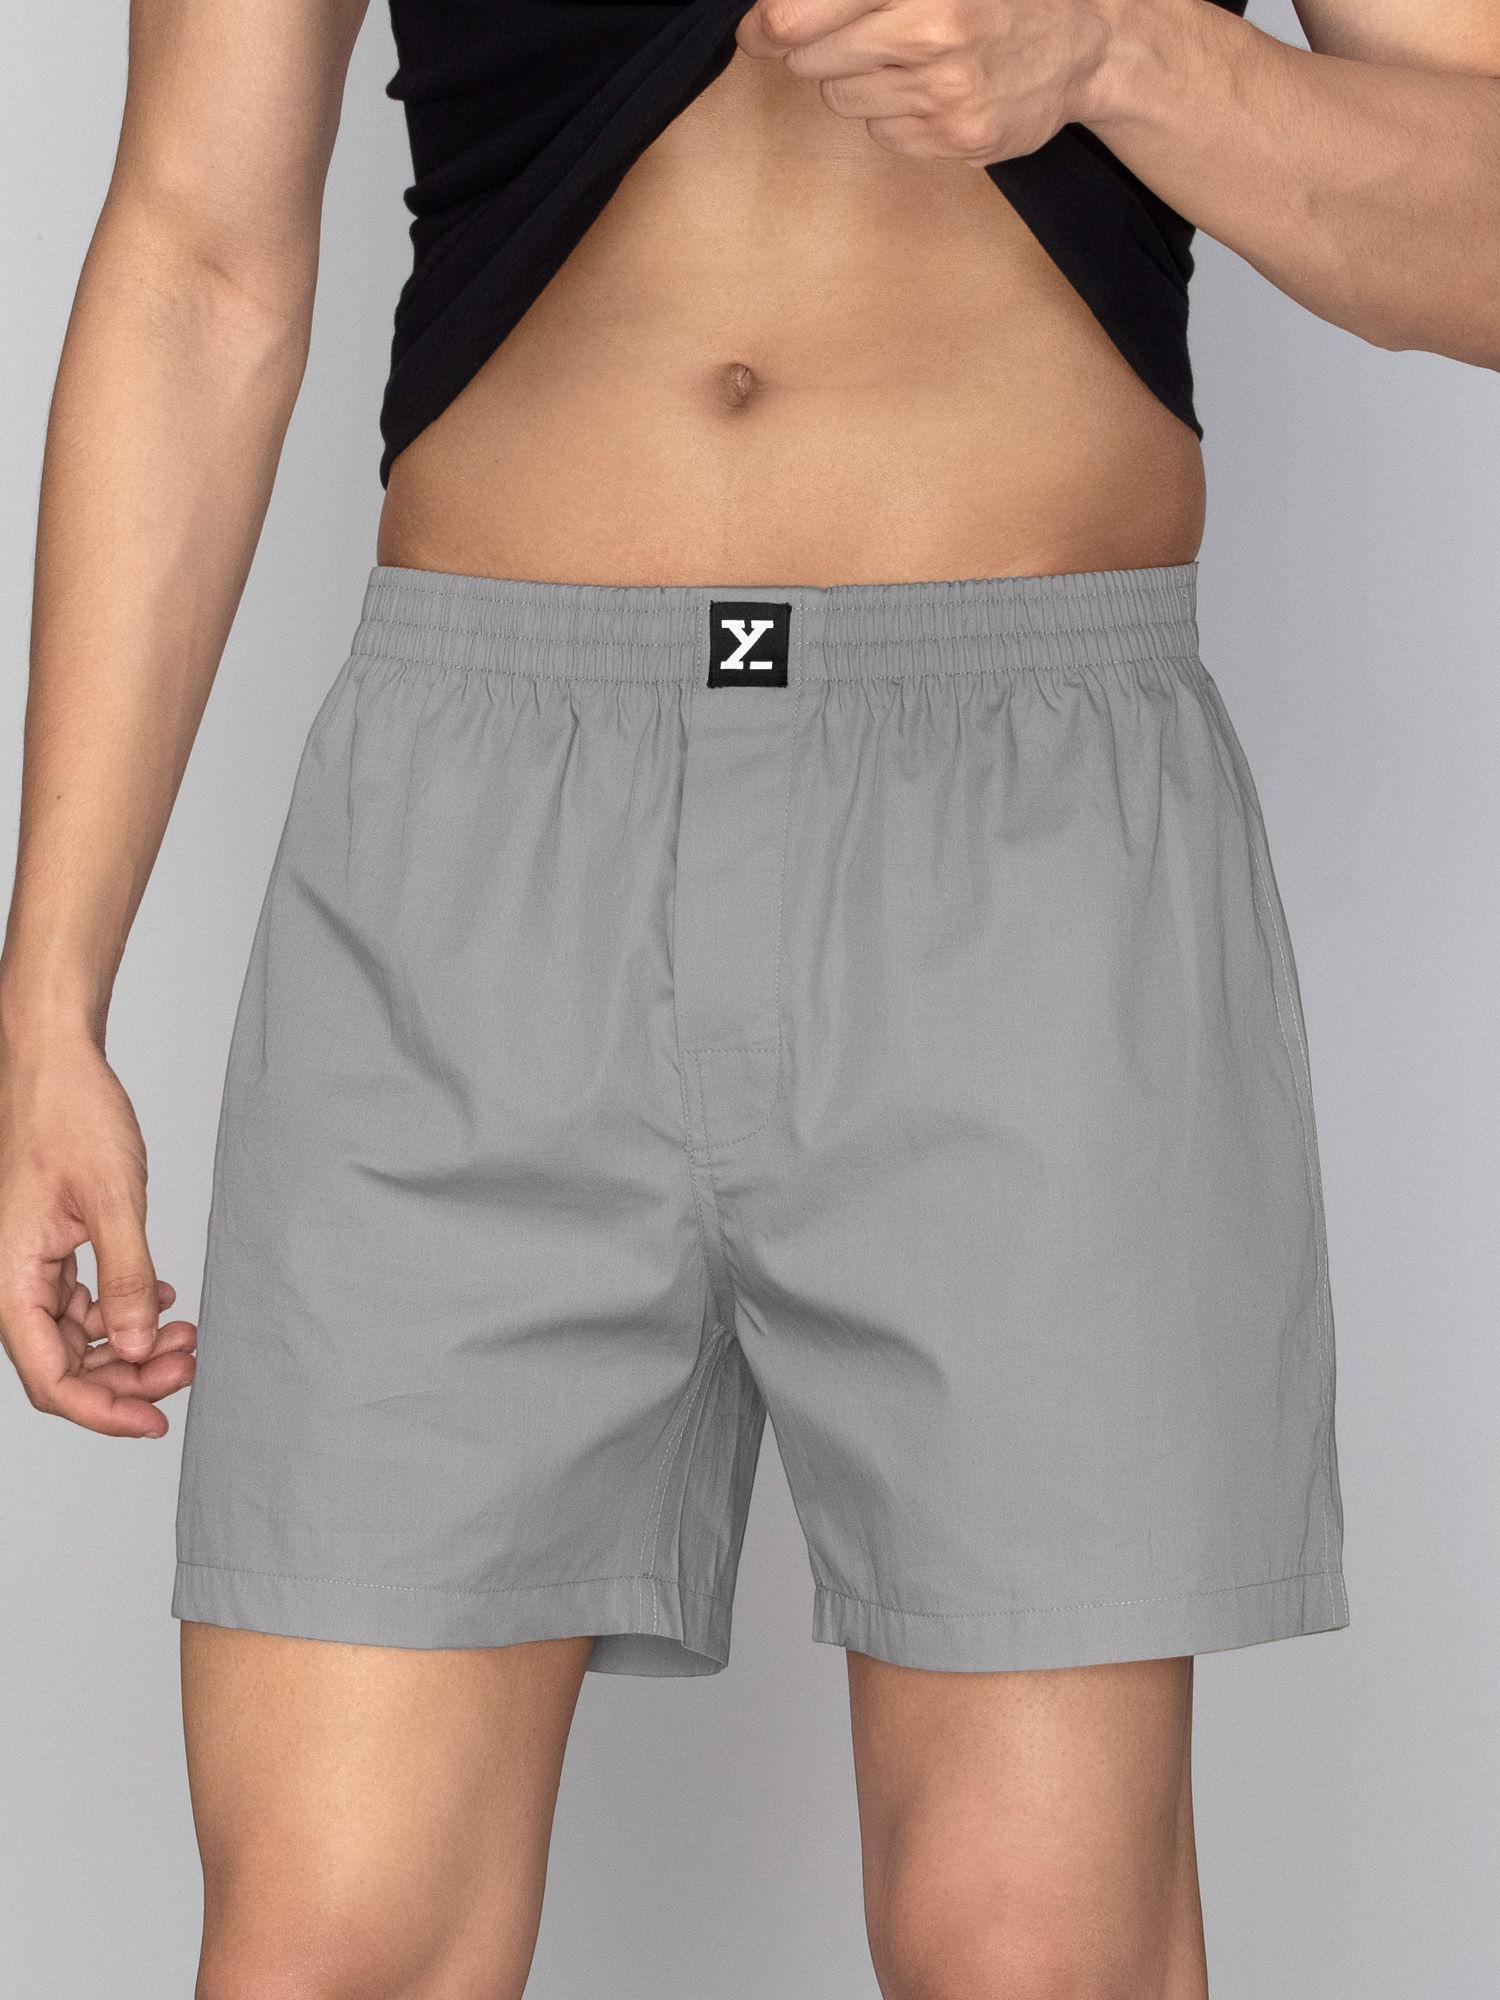 grey pace super combed cotton inner boxers for mens